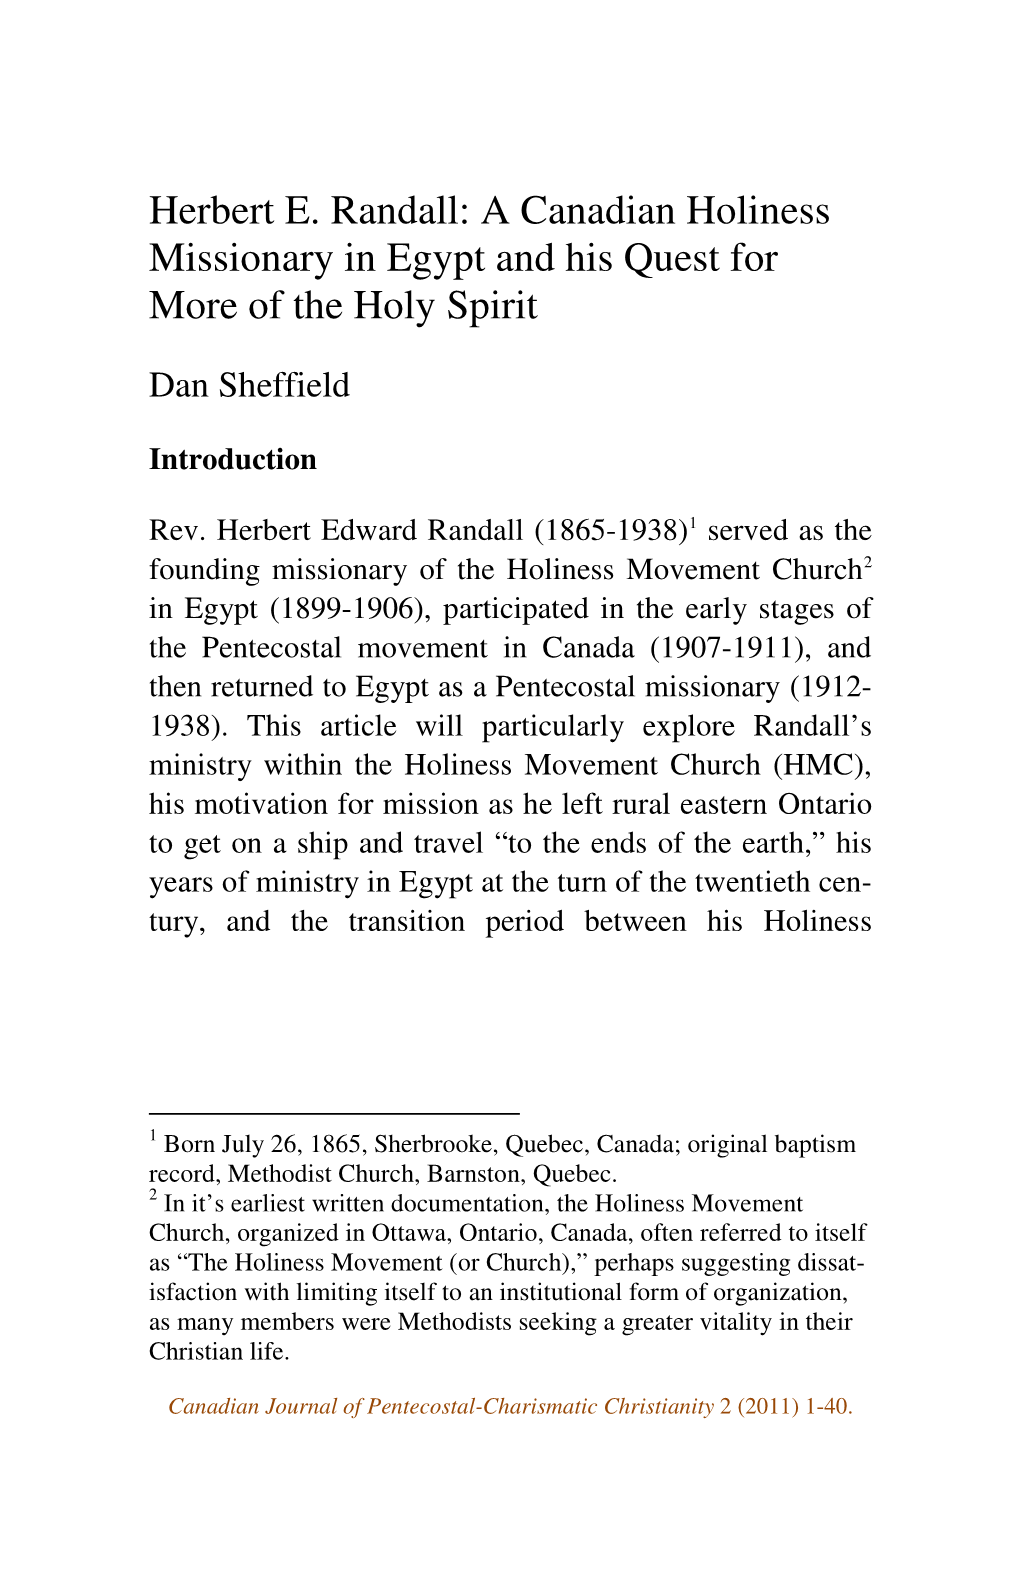 Herbert E. Randall: a Canadian Holiness Missionary in Egypt and His Quest for More of the Holy Spirit